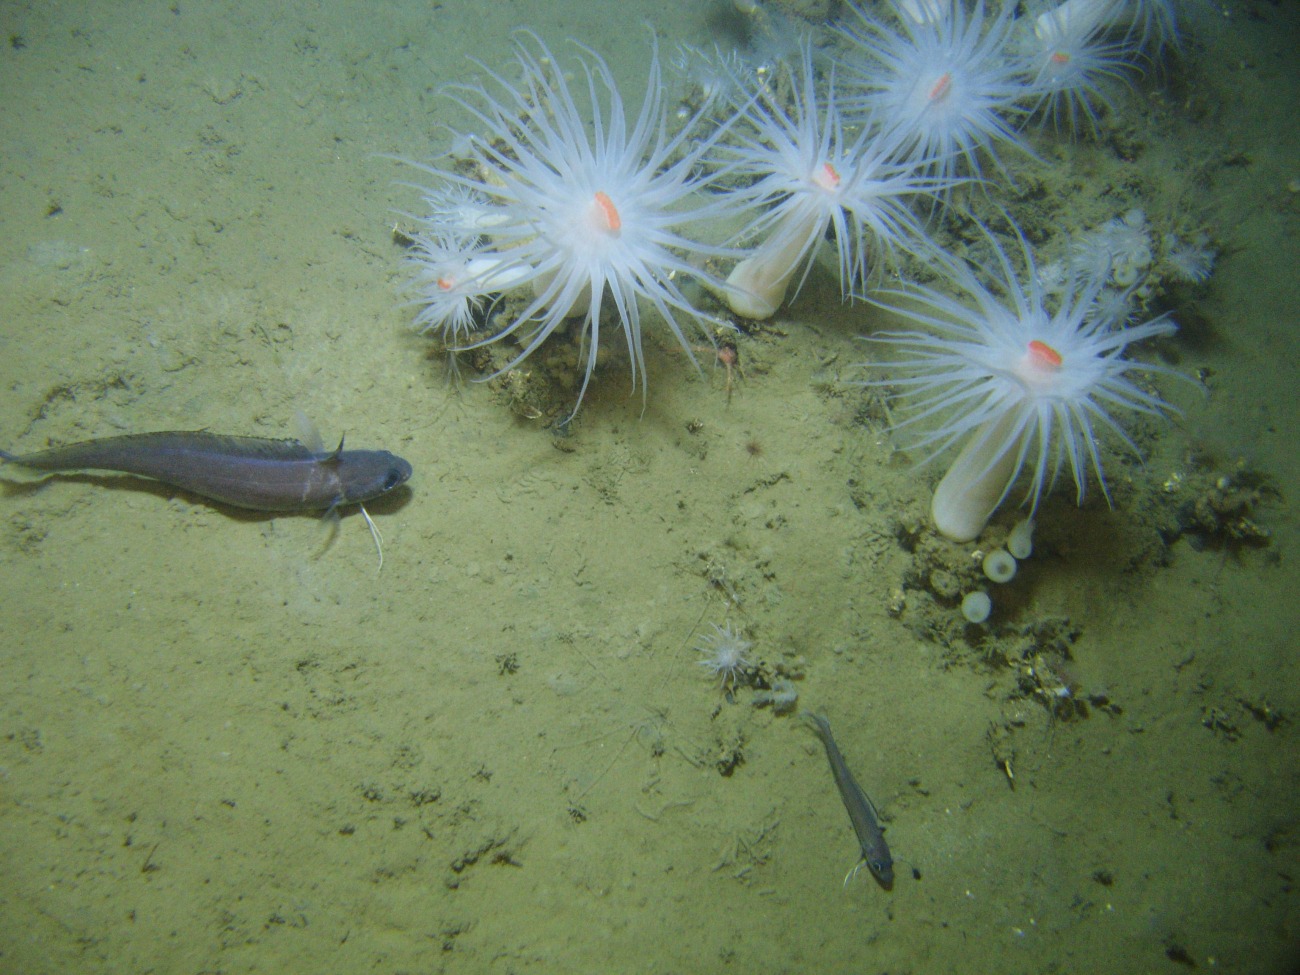 Two sizes of longfin hake in vicinity of stand of large white anemones withorange mouths